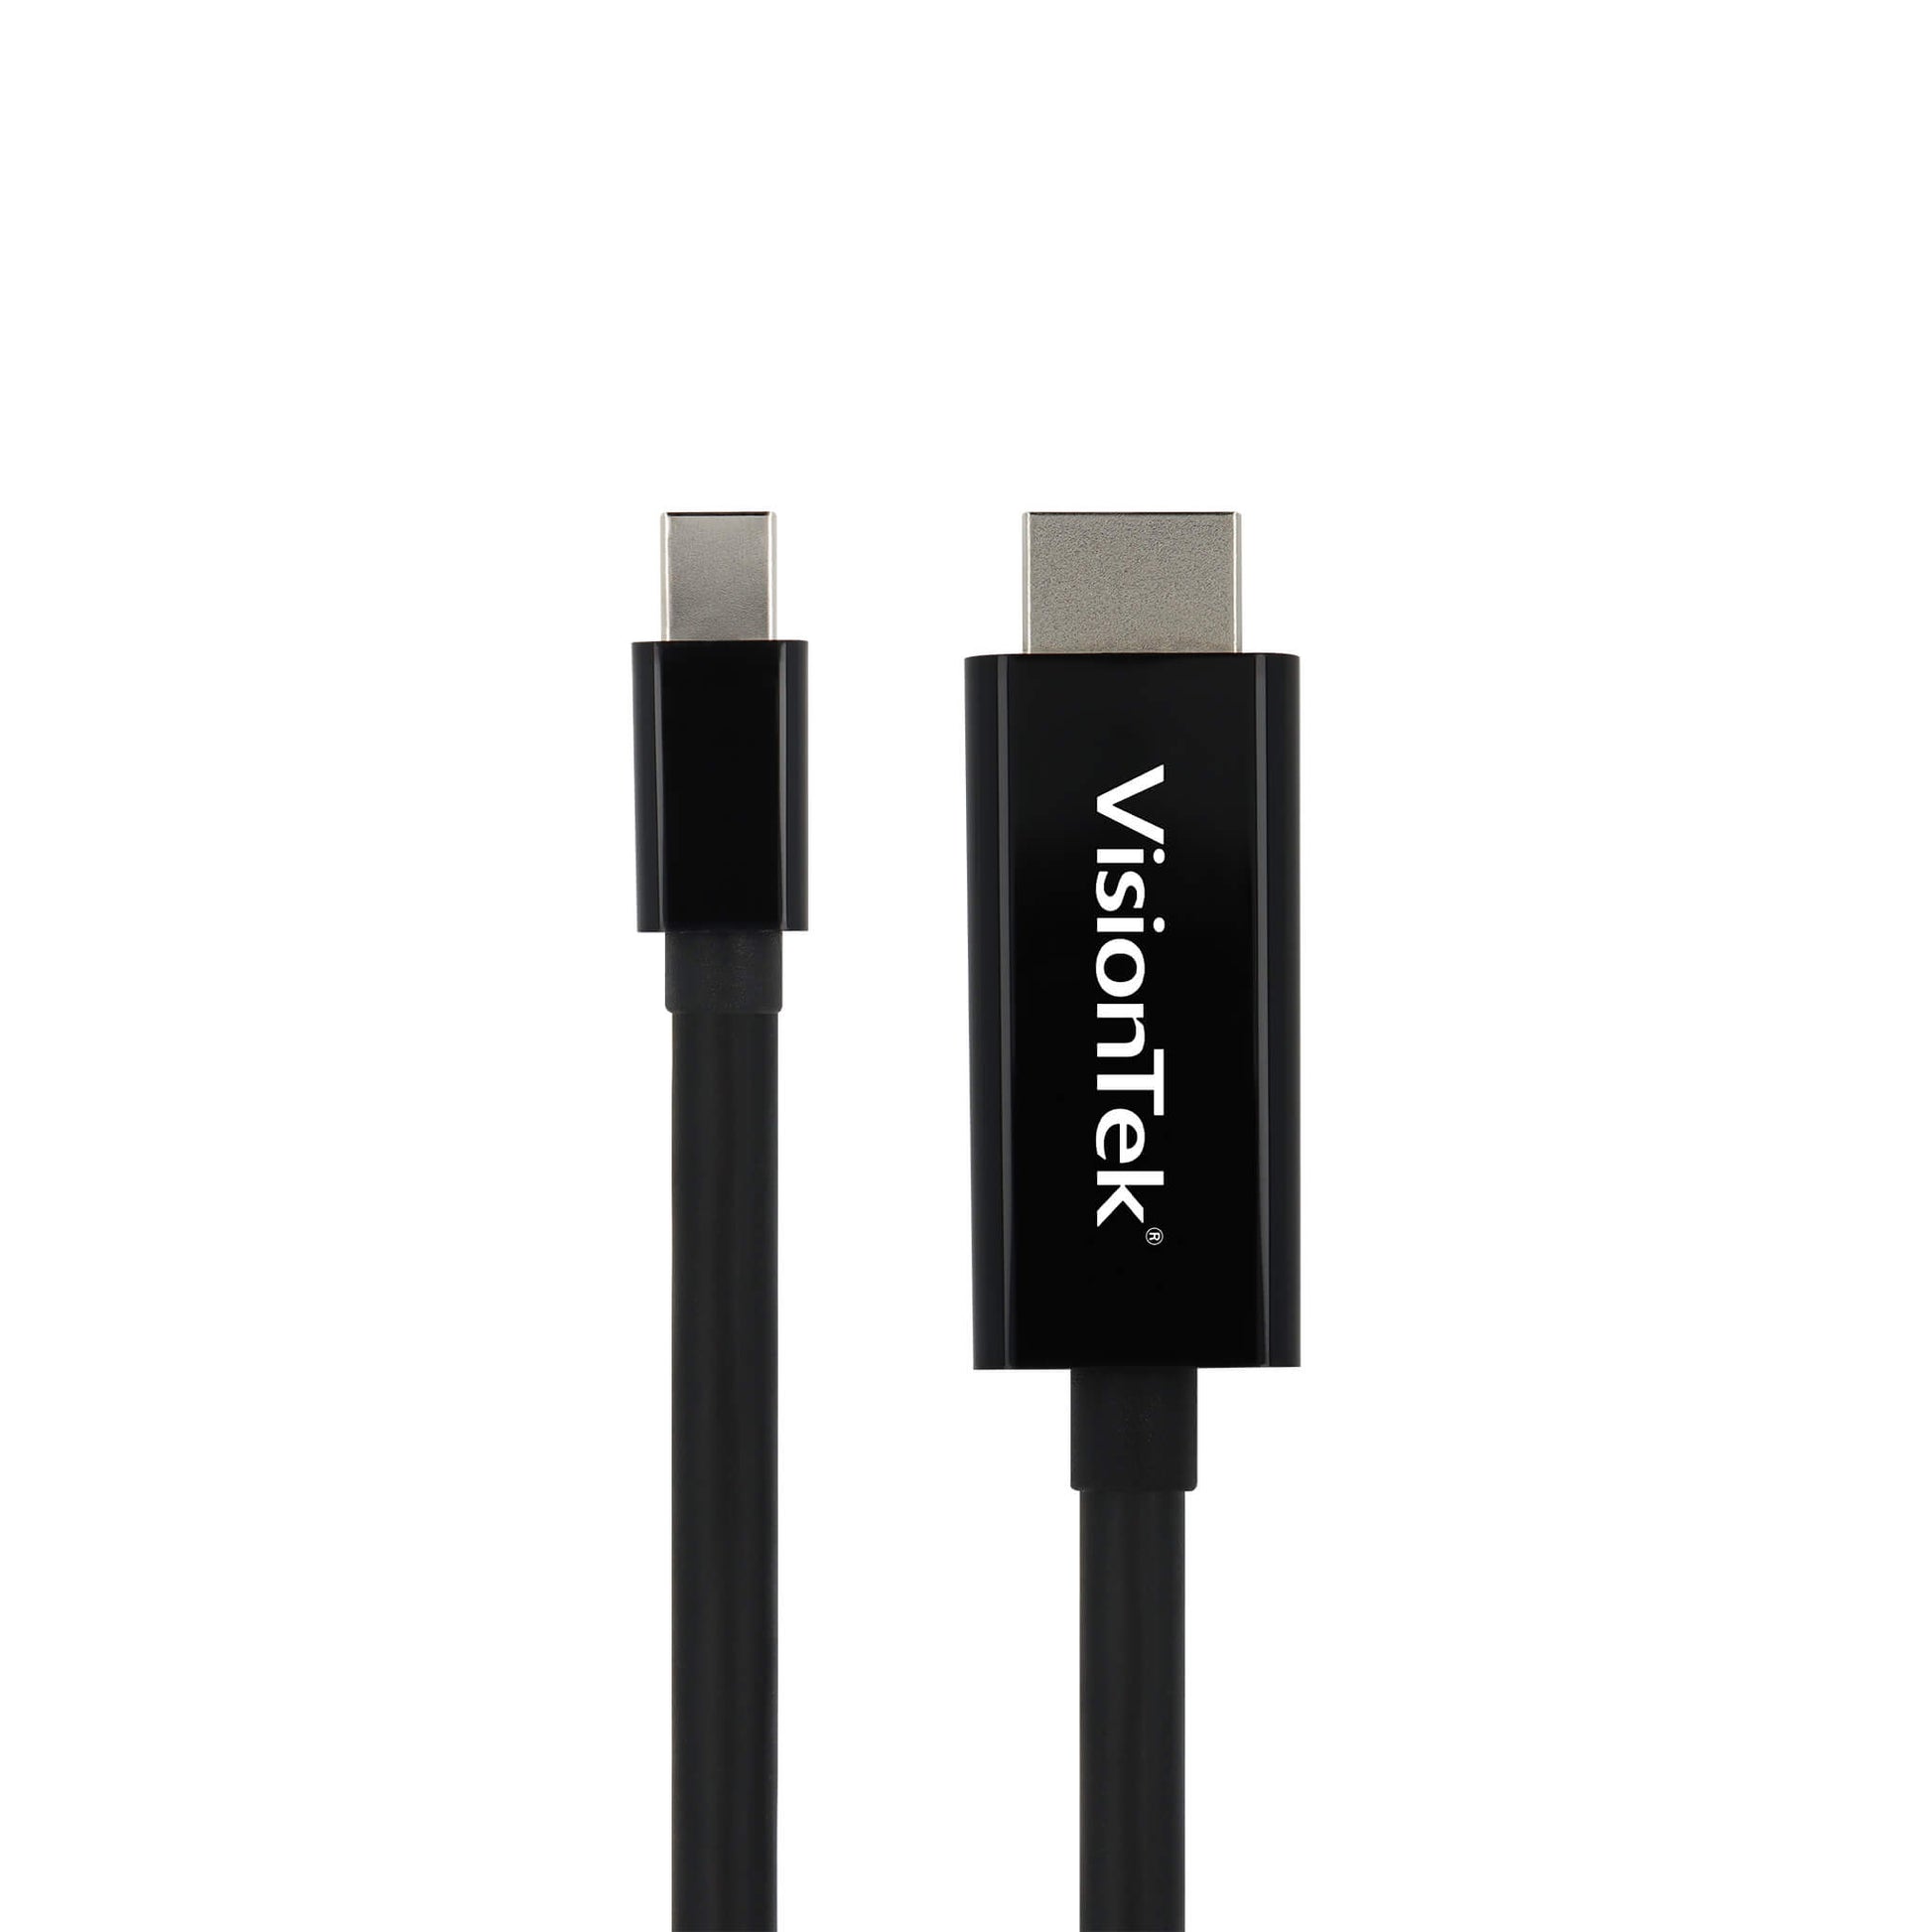 HDMI to DisplayPort Cable - HDMI to DP Adapter - Active Cable  (Male-to-Male) - 4K Compatible - 1.5M/5 ft - VisionTek